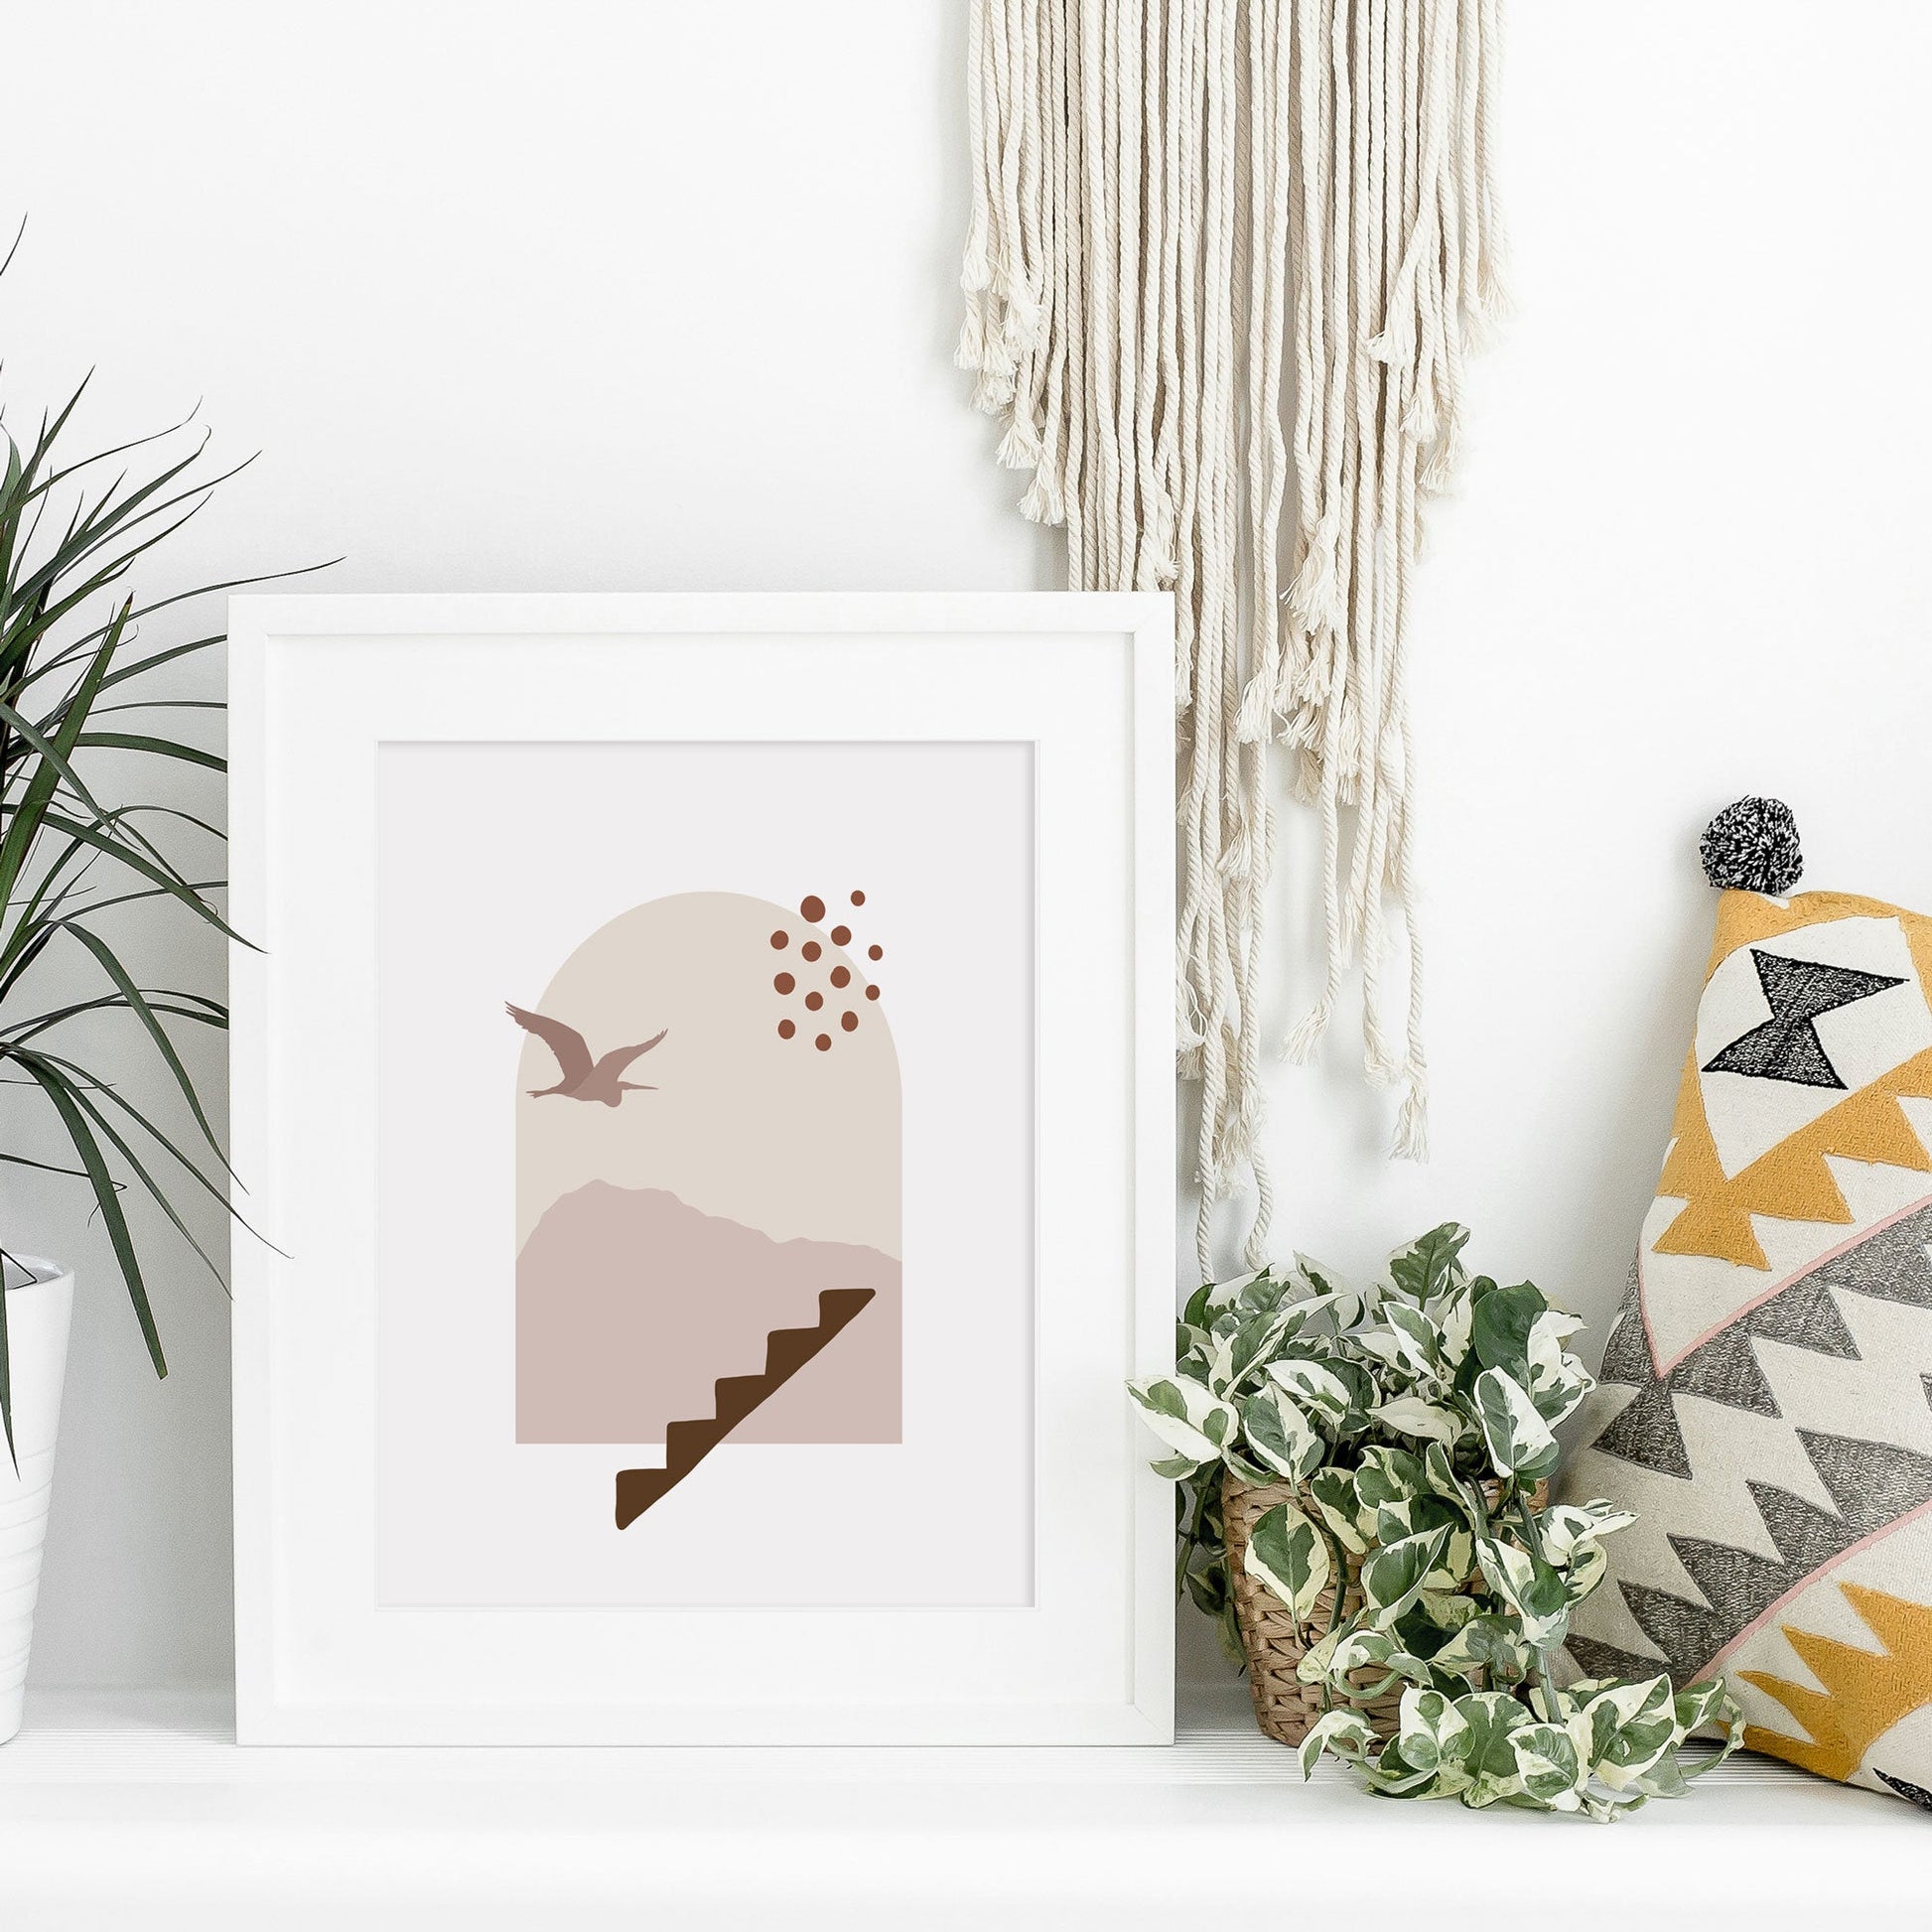 Beige and Pink Modern Landscape Wall Print - Mountains Bird Abstract Art - Large Printable Living Room Artwork